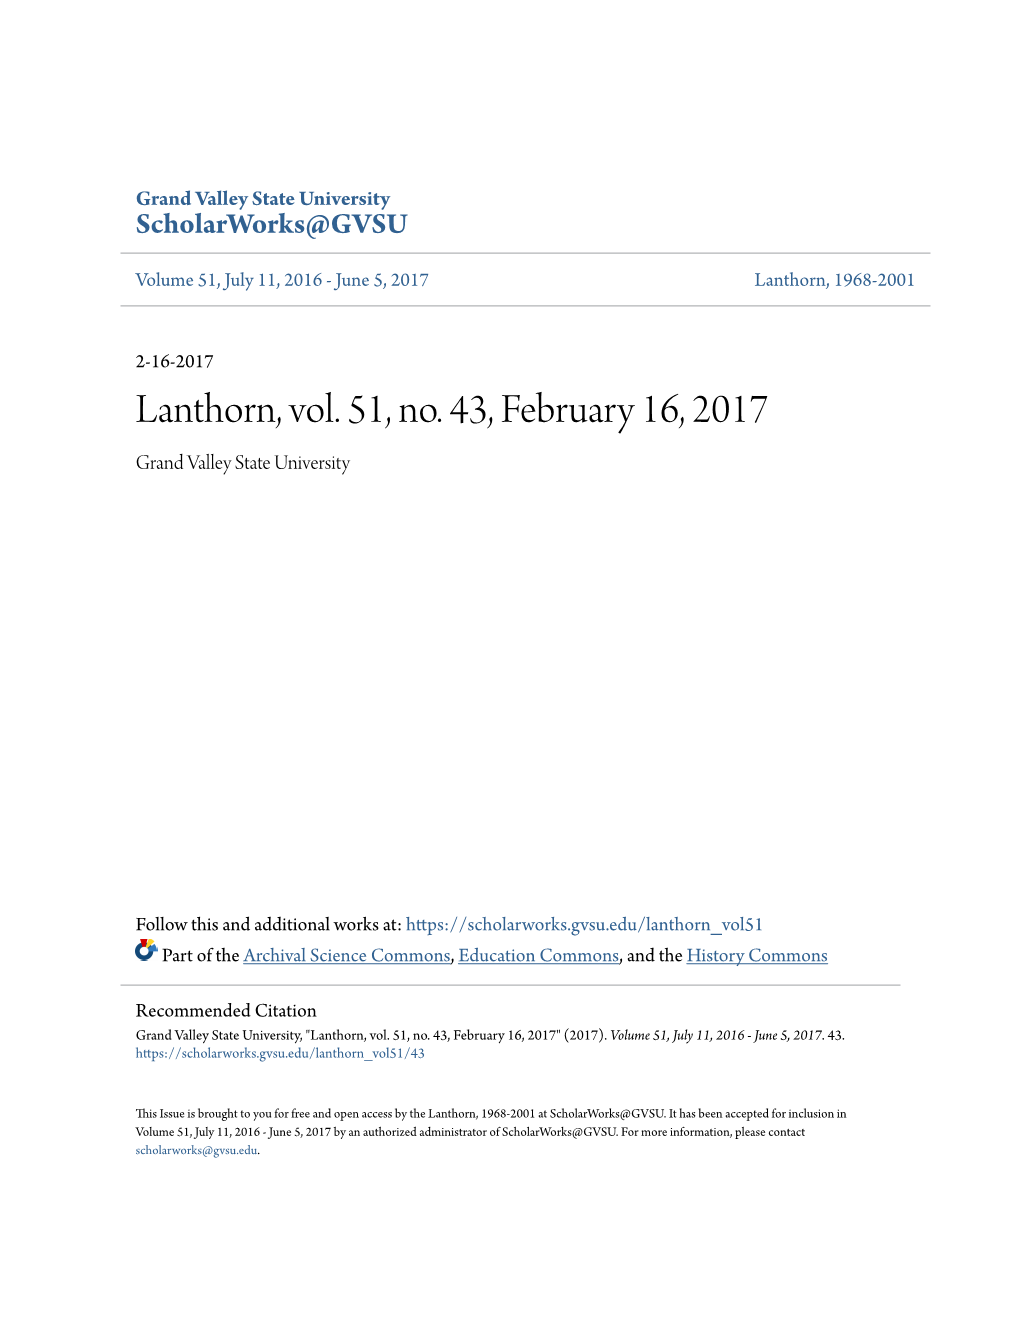 Lanthorn, Vol. 51, No. 43, February 16, 2017 Grand Valley State University